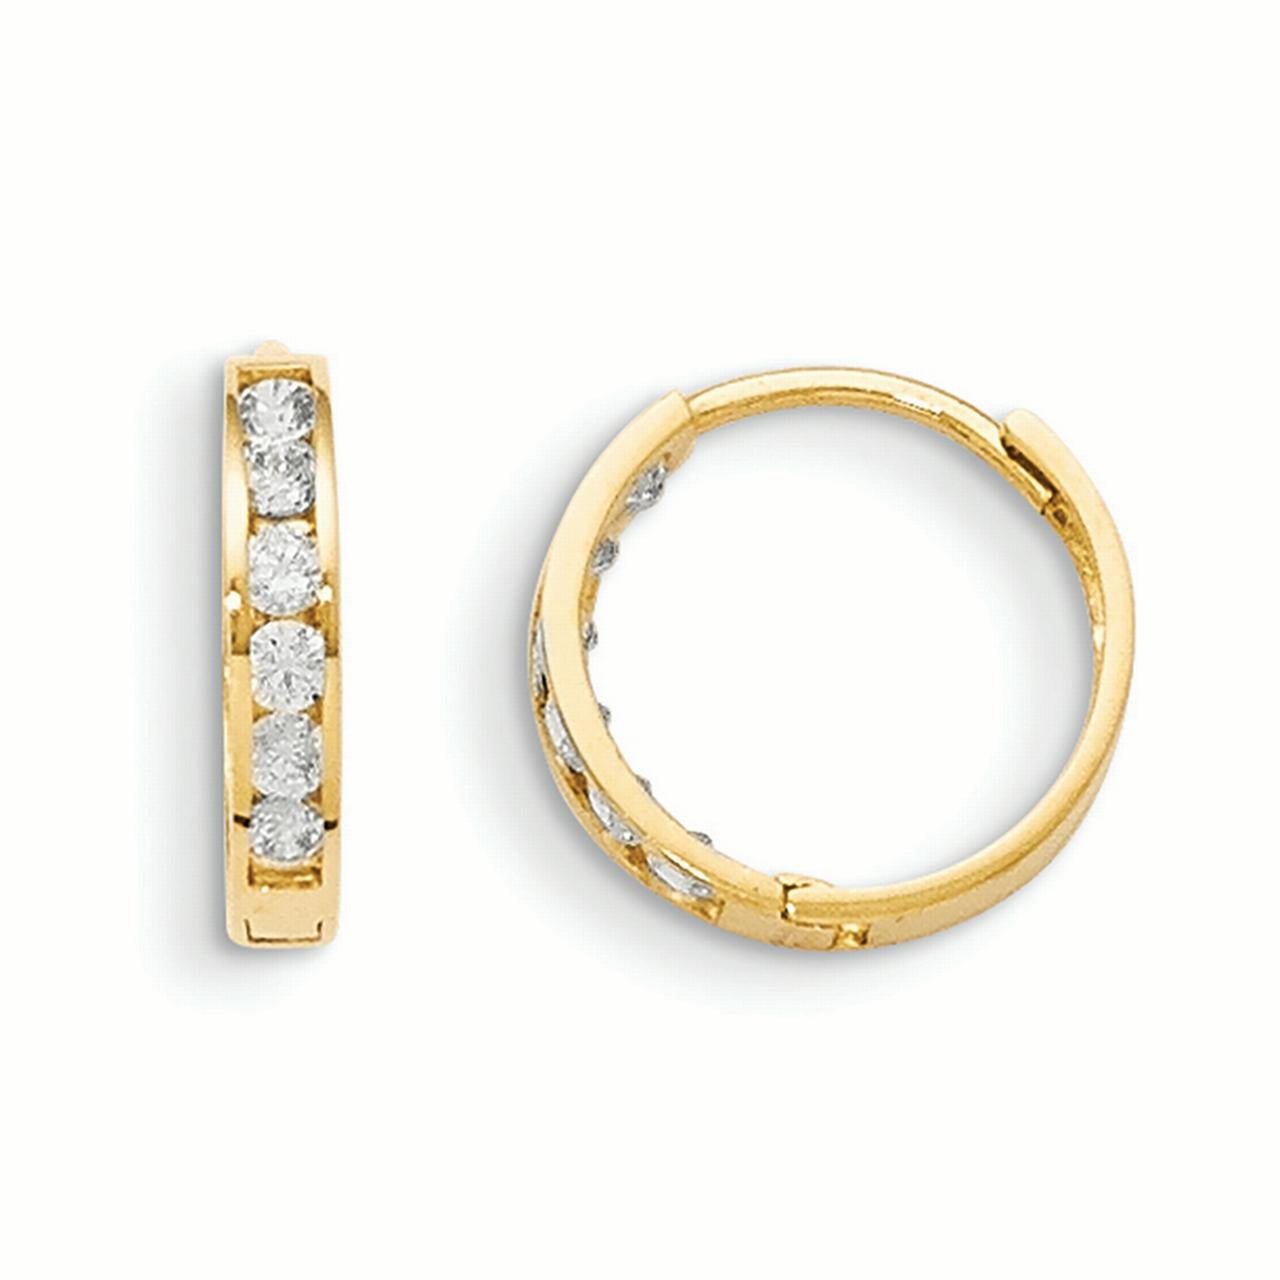 Details about   14K Yellow Gold Madi K Children's 11.4 MM CZ Hinged Huggie Hoop Earrings 